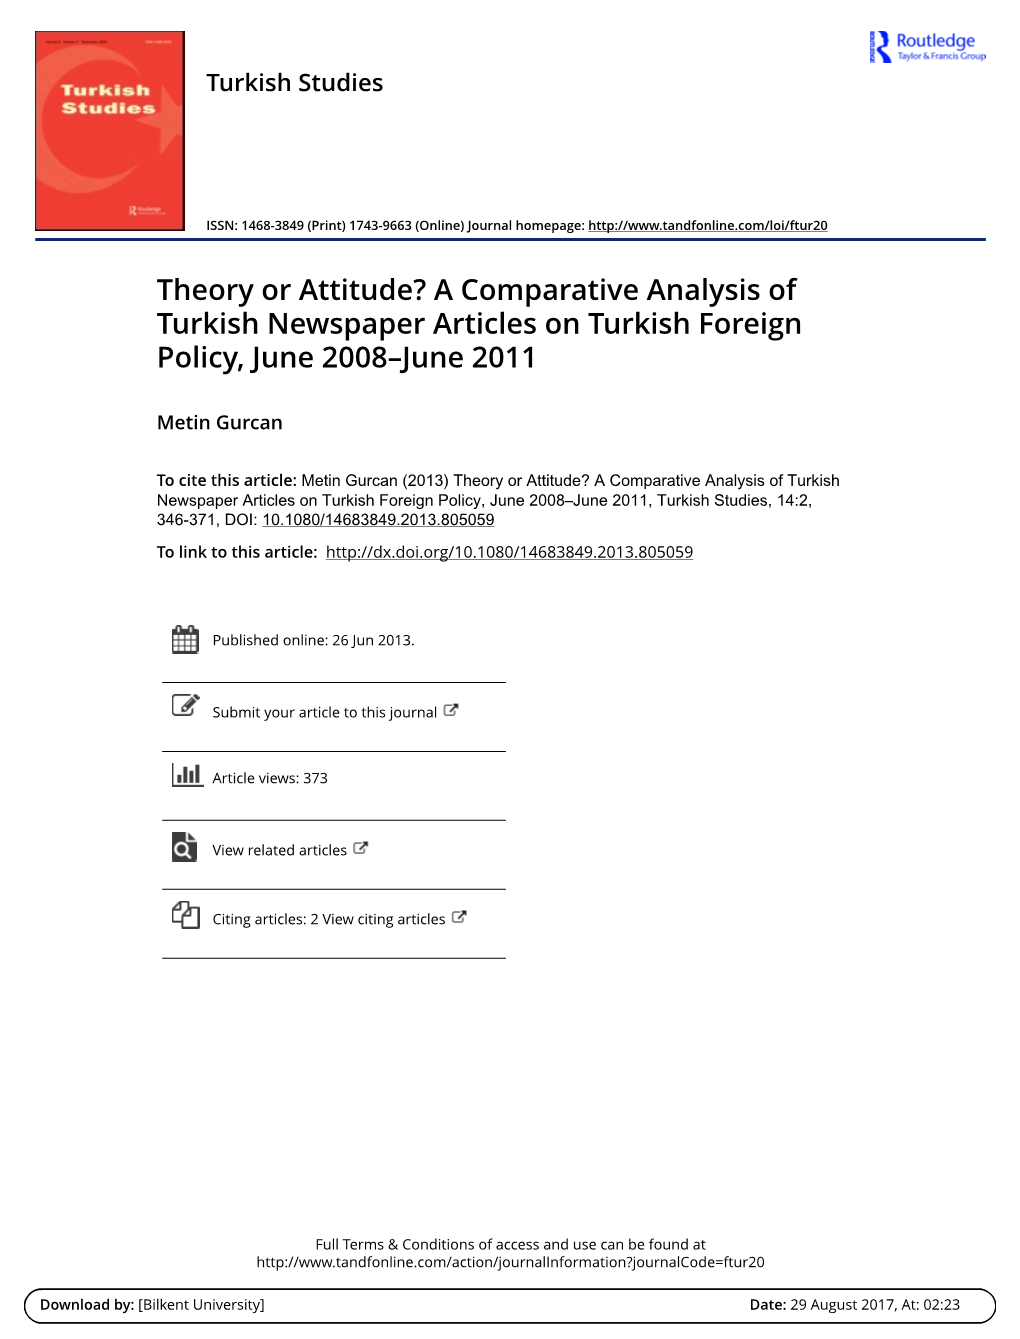 Theory Or Attitude? a Comparative Analysis of Turkish Newspaper Articles on Turkish Foreign Policy, June 2008–June 2011